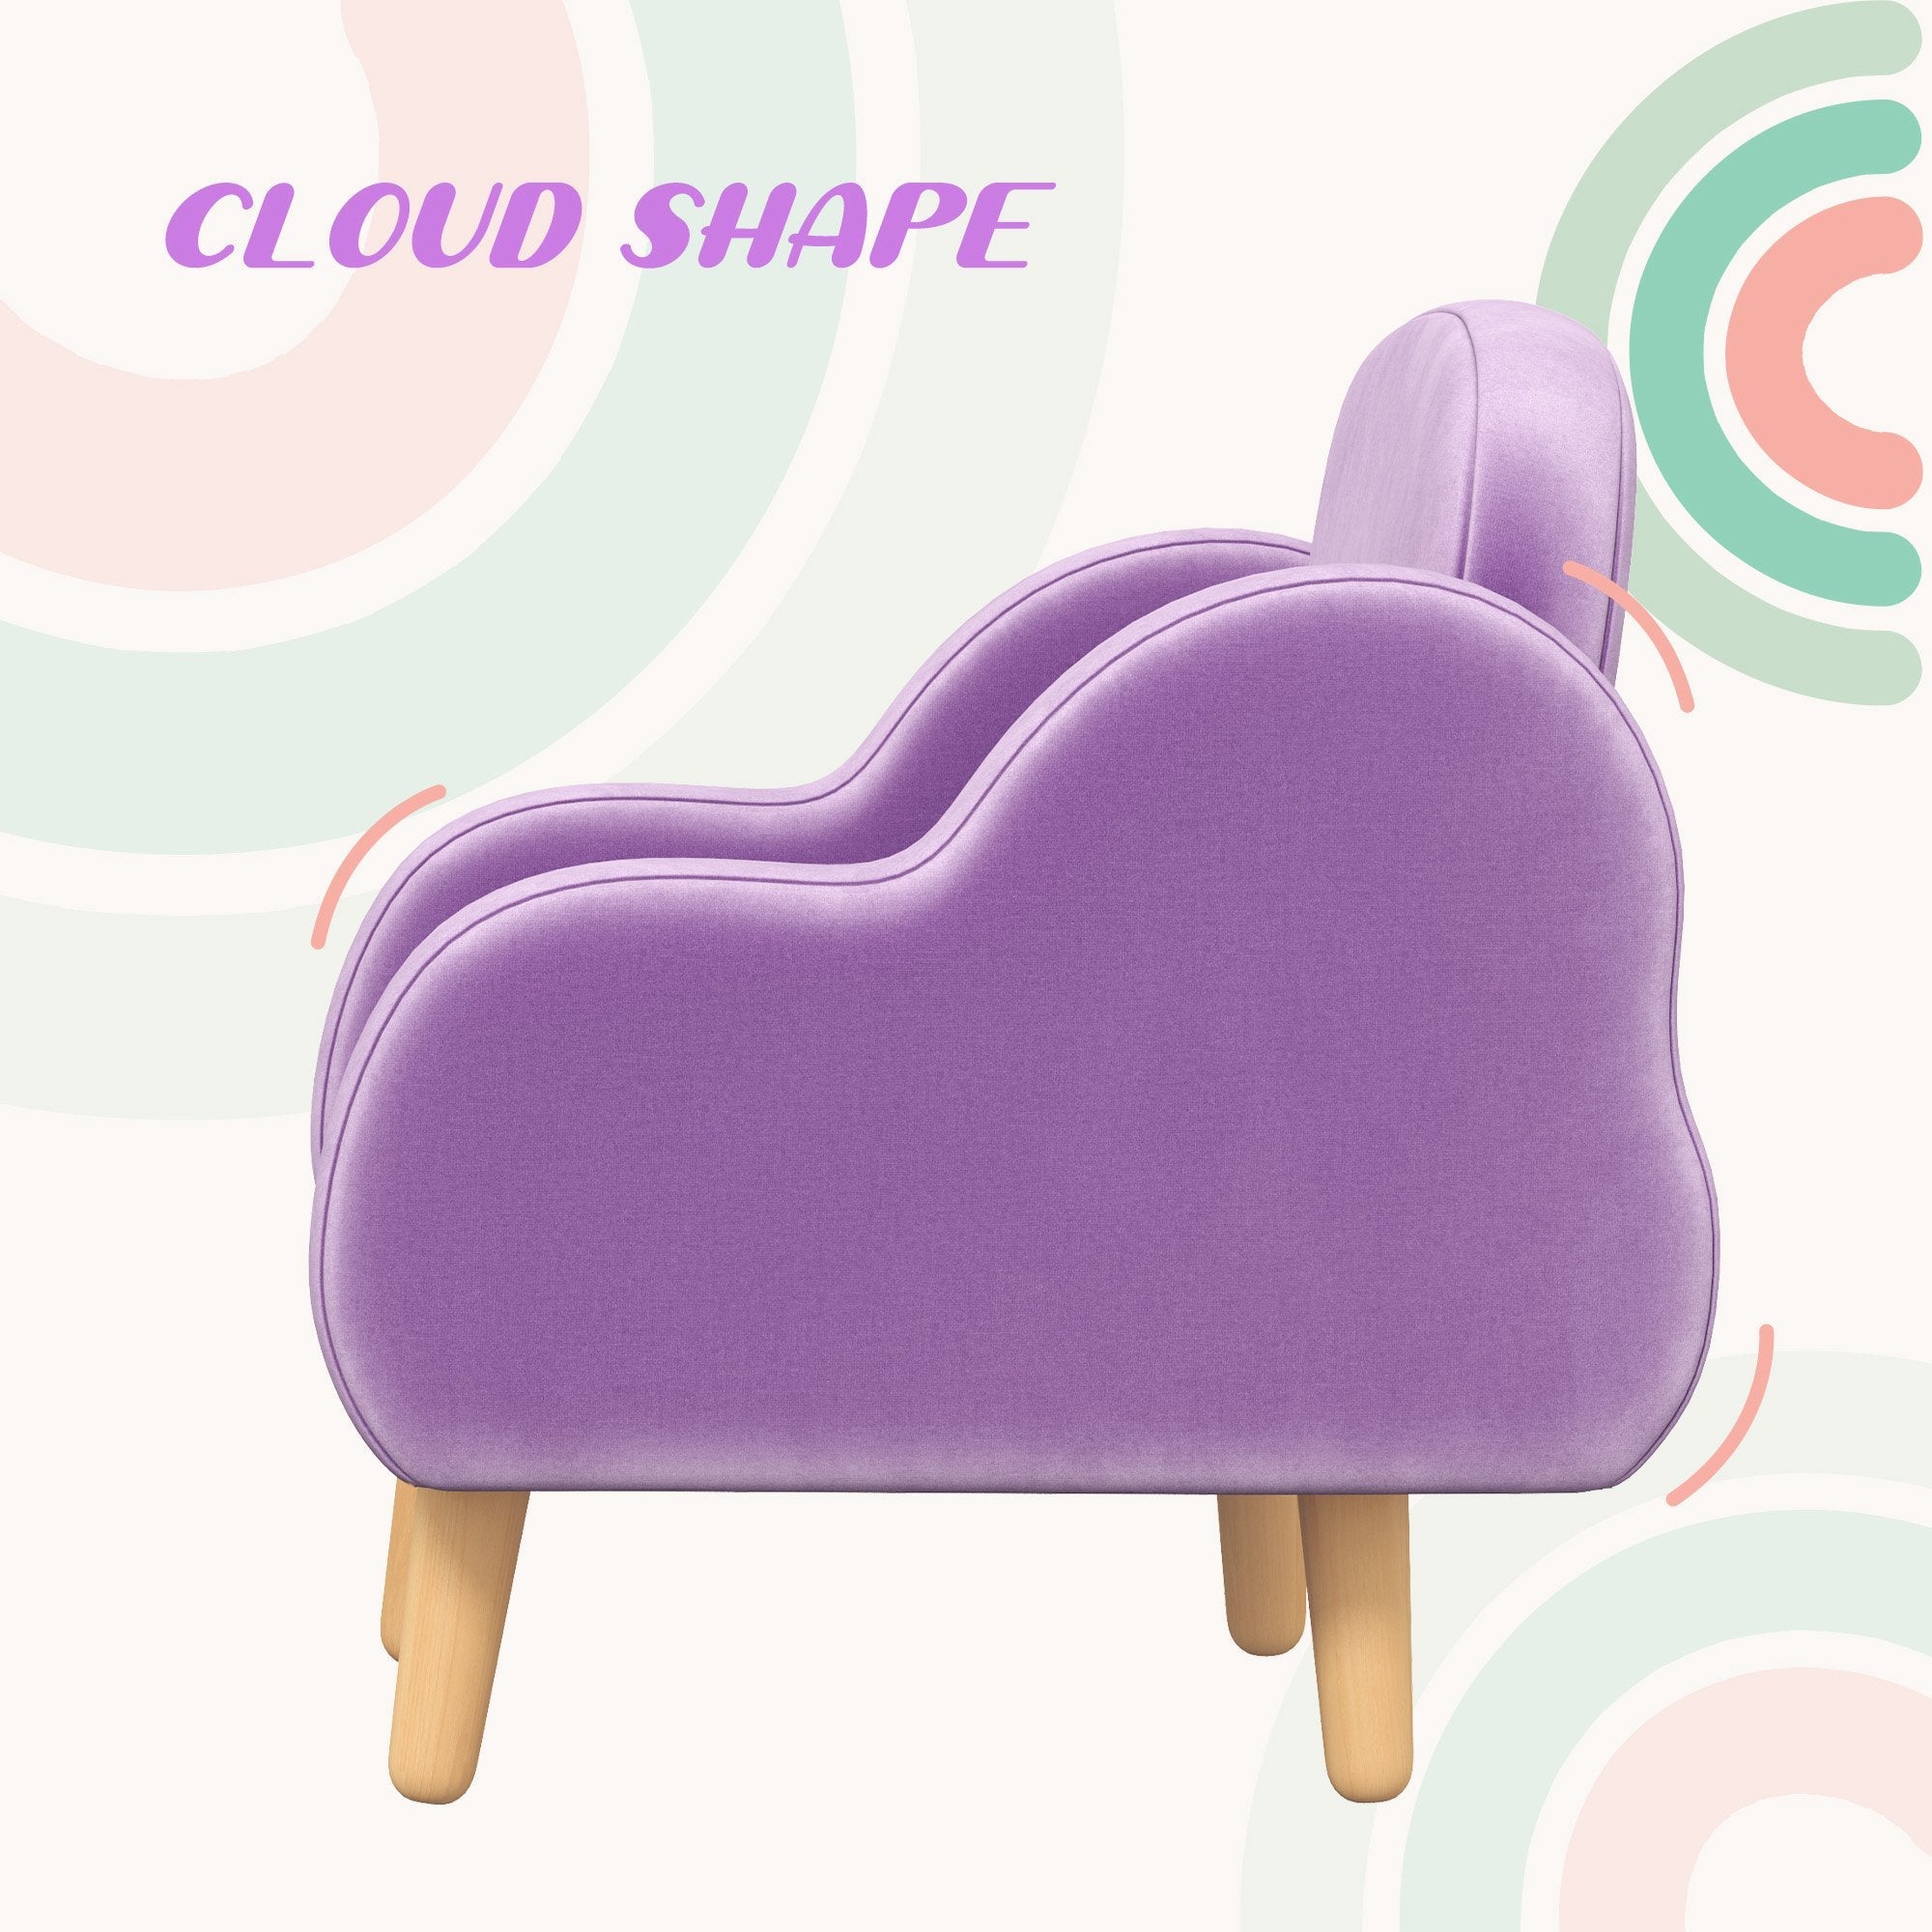 Cloud Shape Toddler Armchair, Ergonomically Designed Kids Chair, Comfy Children Playroom Mini Sofa for Relaxing, for Ages 1.5-5 Years - Purple-3